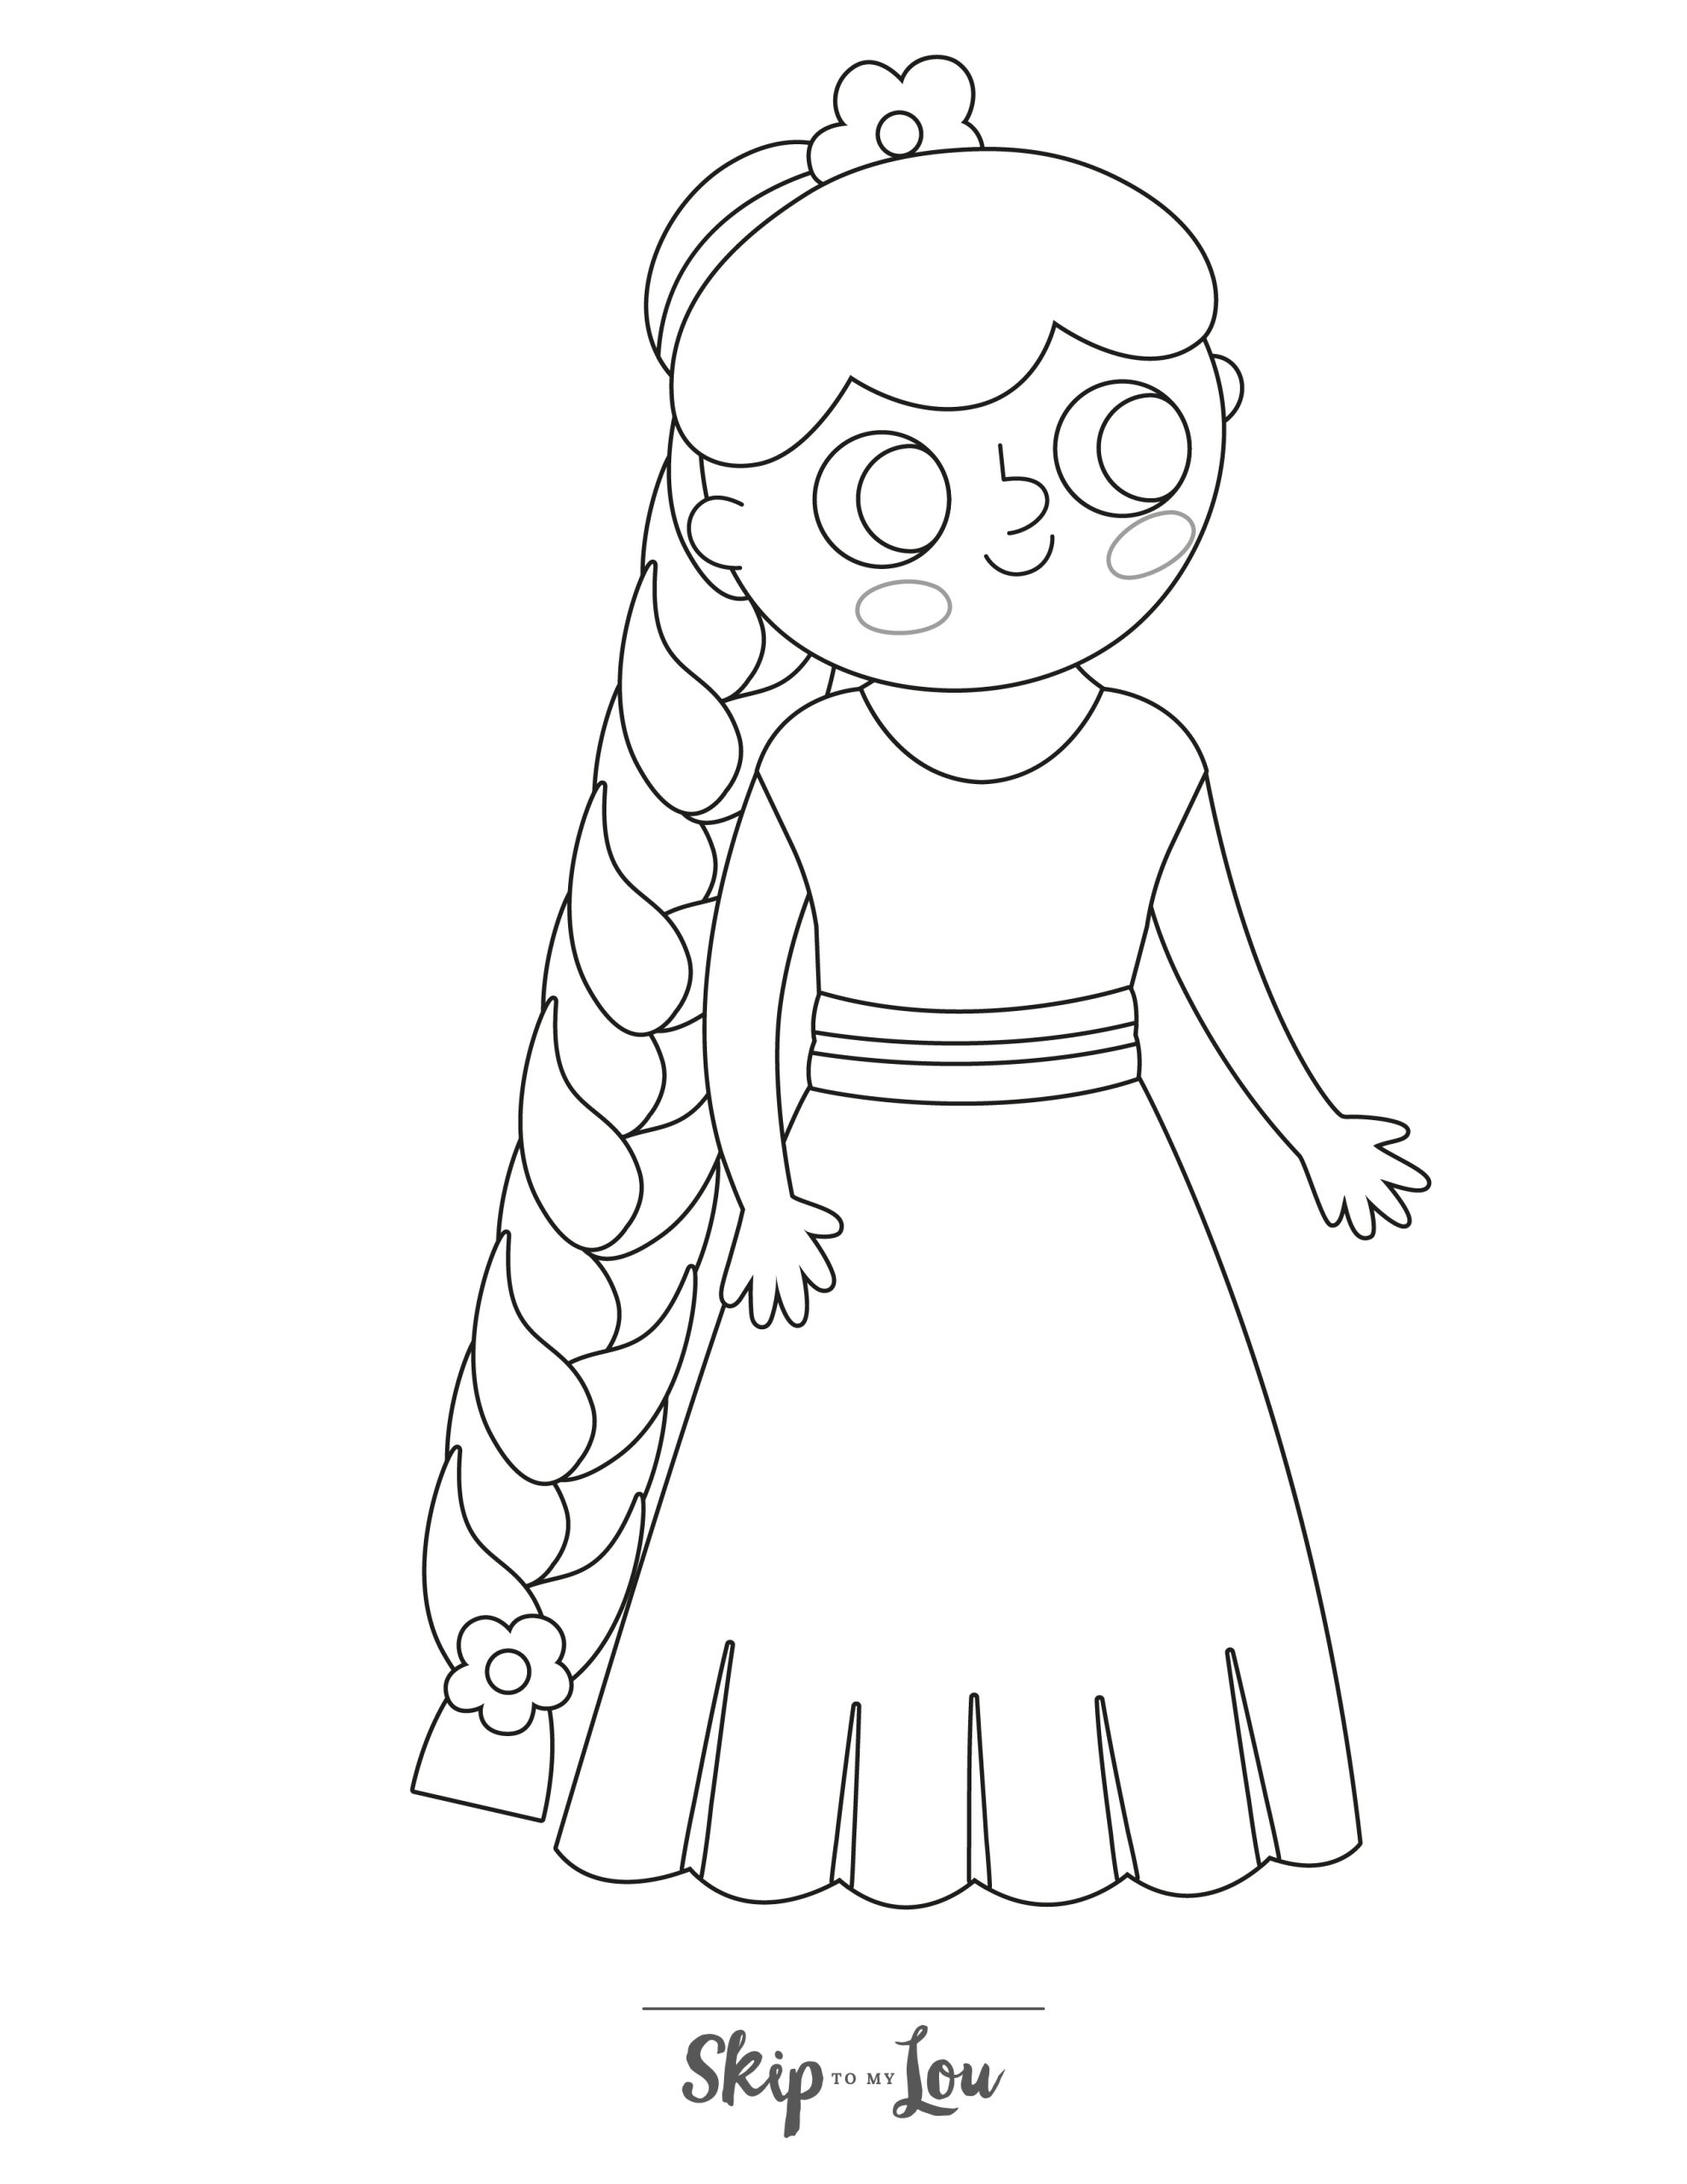 Rapunzel Coloring Page 7 - Line drawing showing Rapunsel's long hair